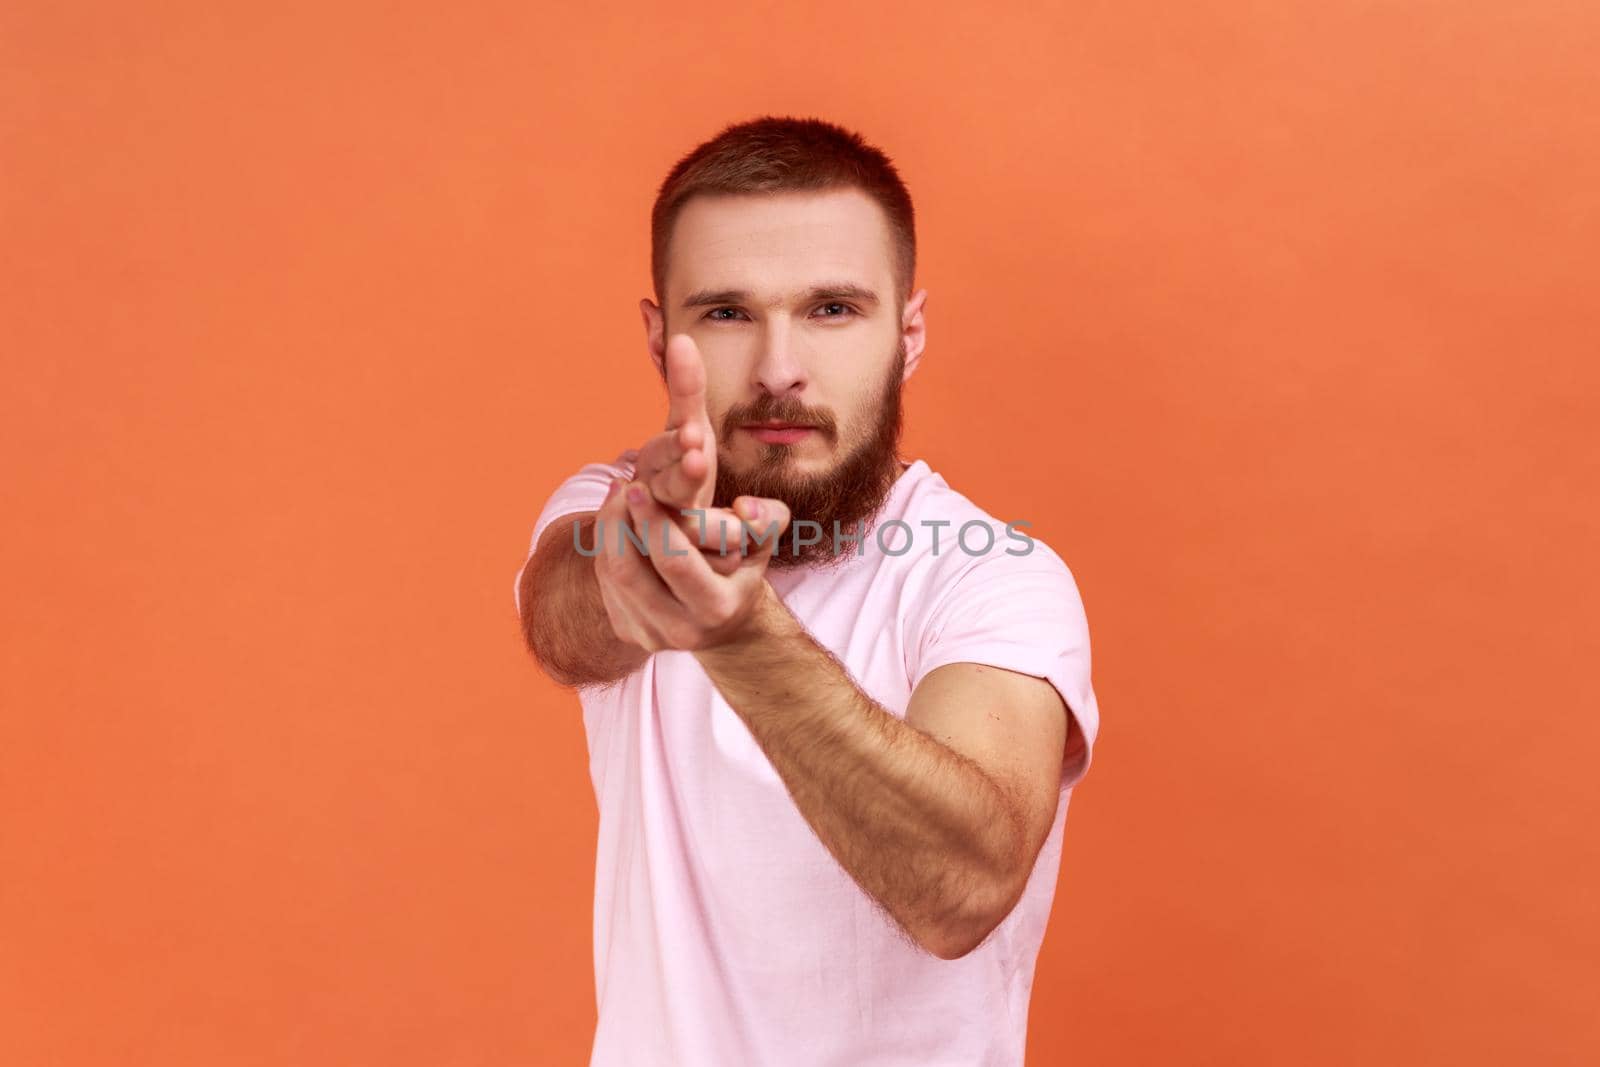 Portrait of serious brave bearded man holding fingers pretending holding gun, aiming enemy, self-defense, wearing pink T-shirt. Indoor studio shot isolated on orange background.